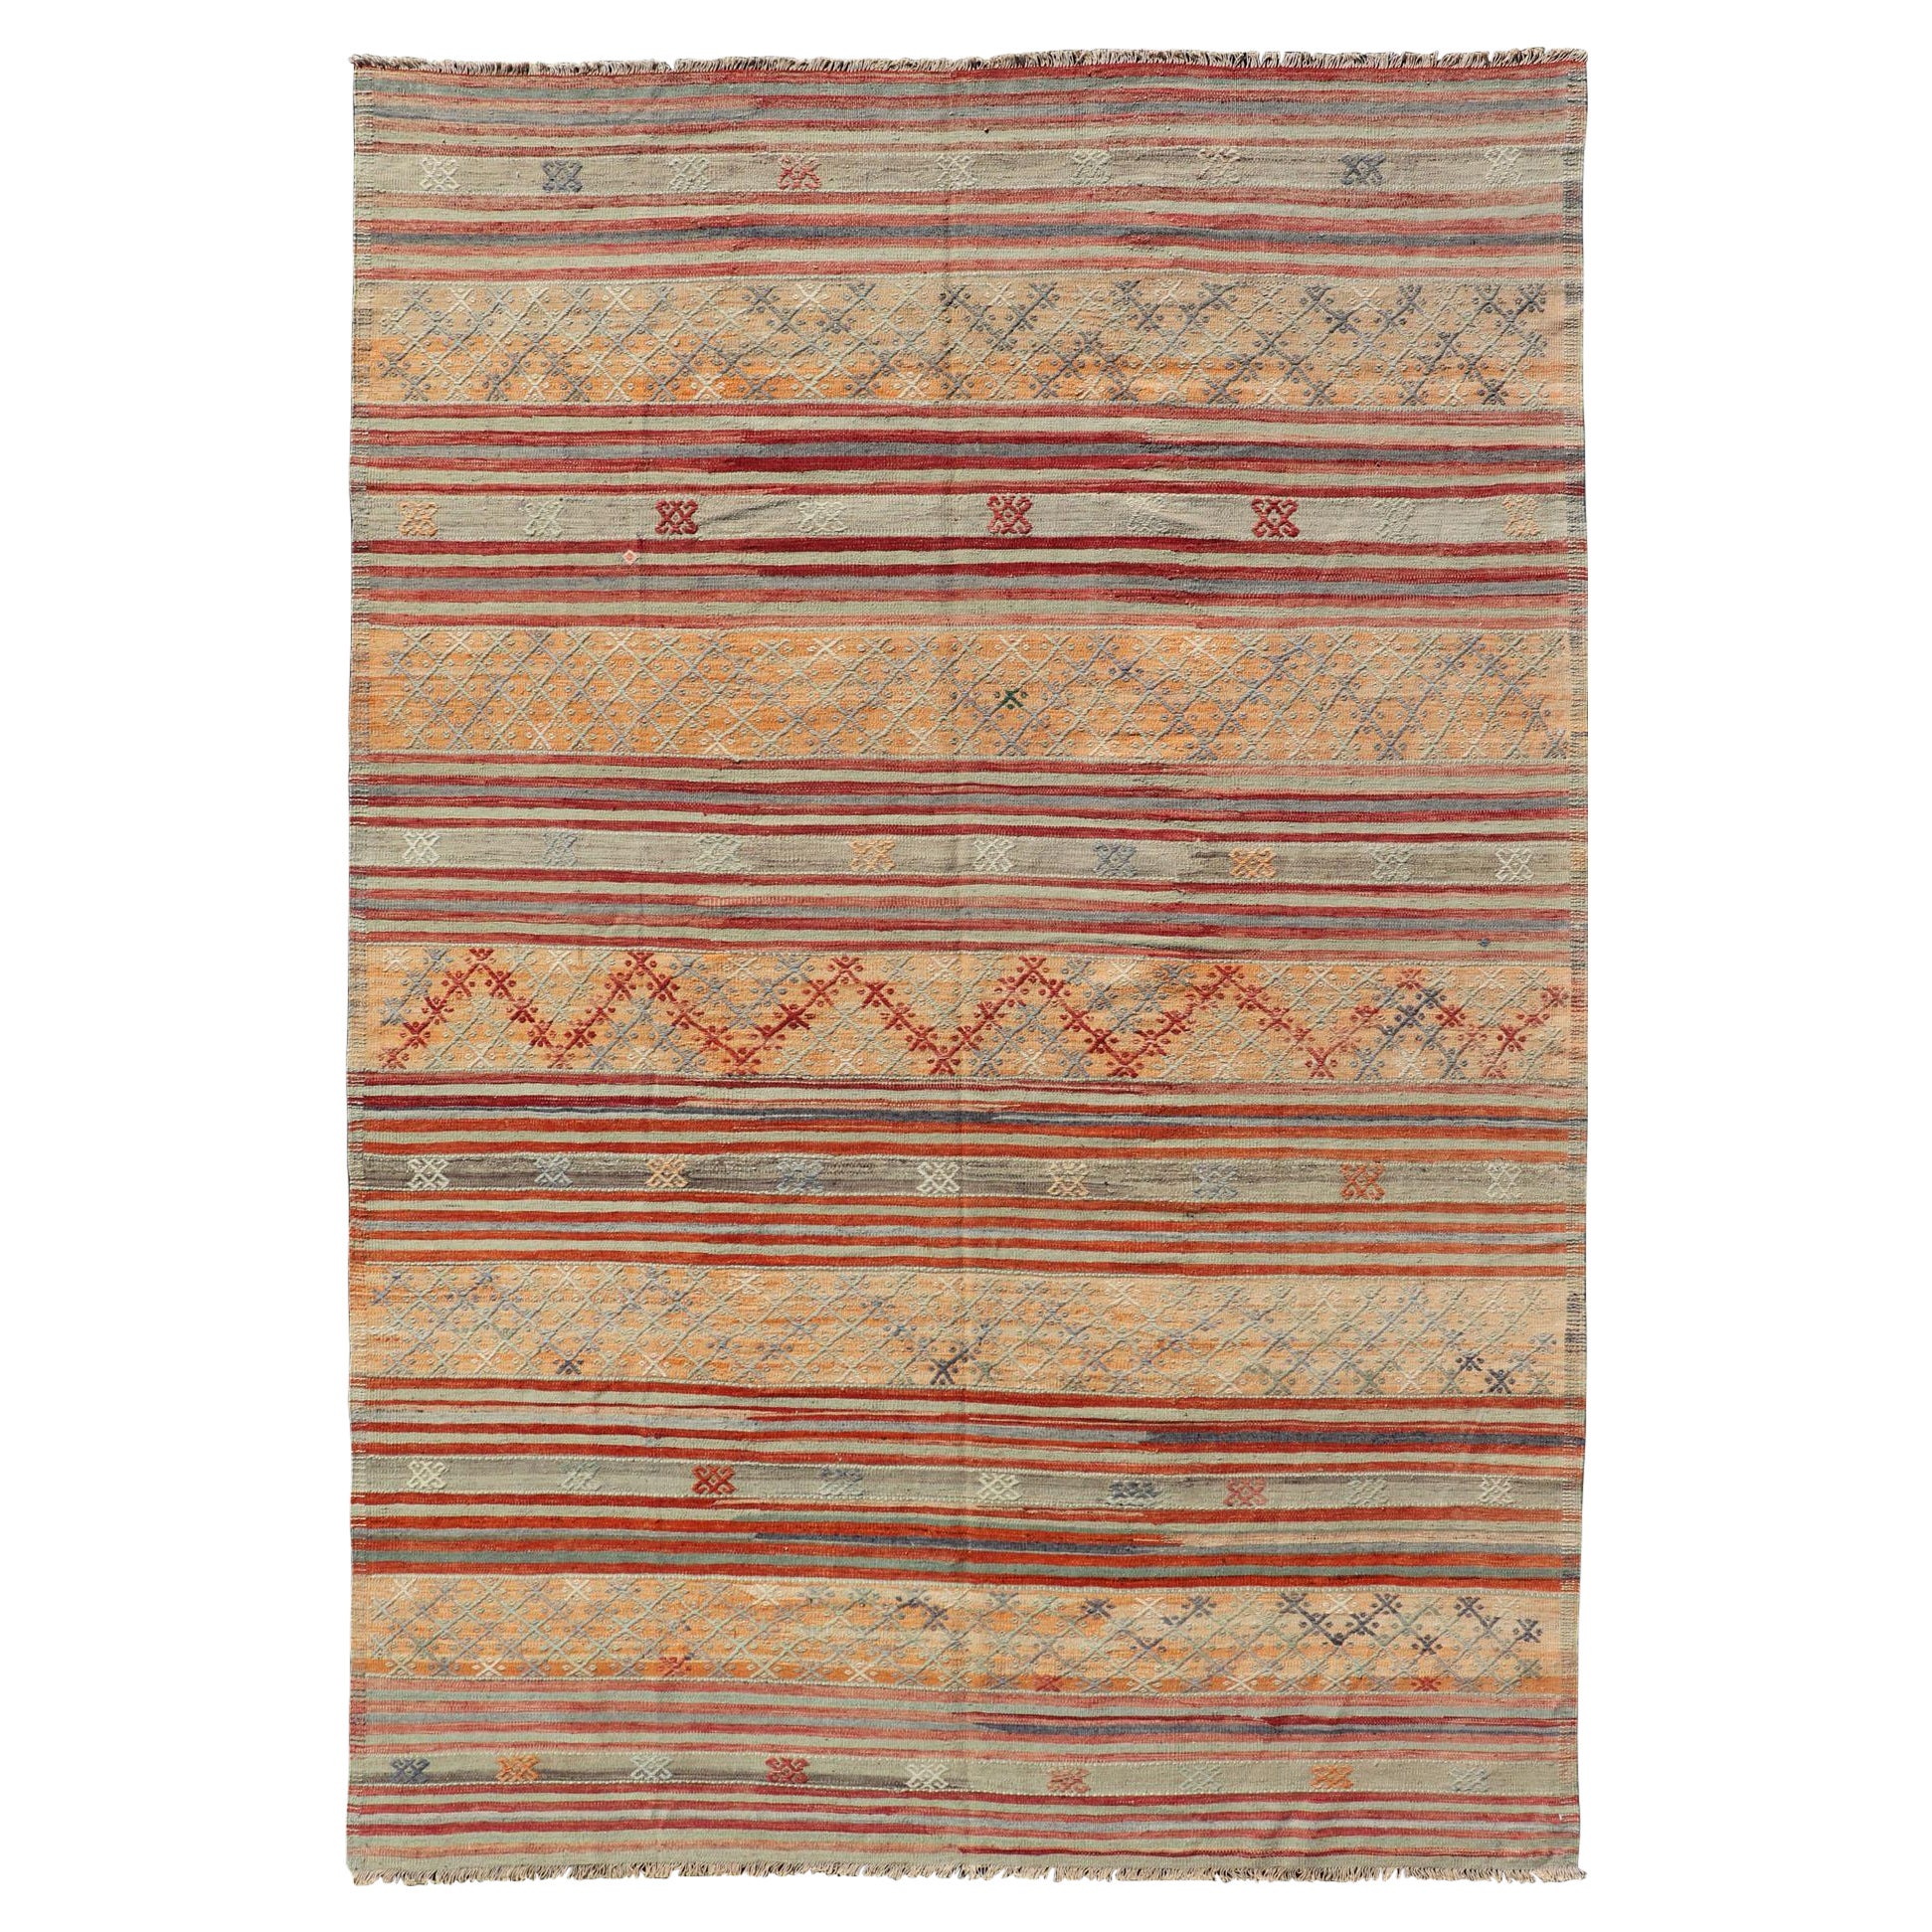 Colorful Vintage Turkish Embroidered Kilim with Stripes and Geometric Motifs  For Sale